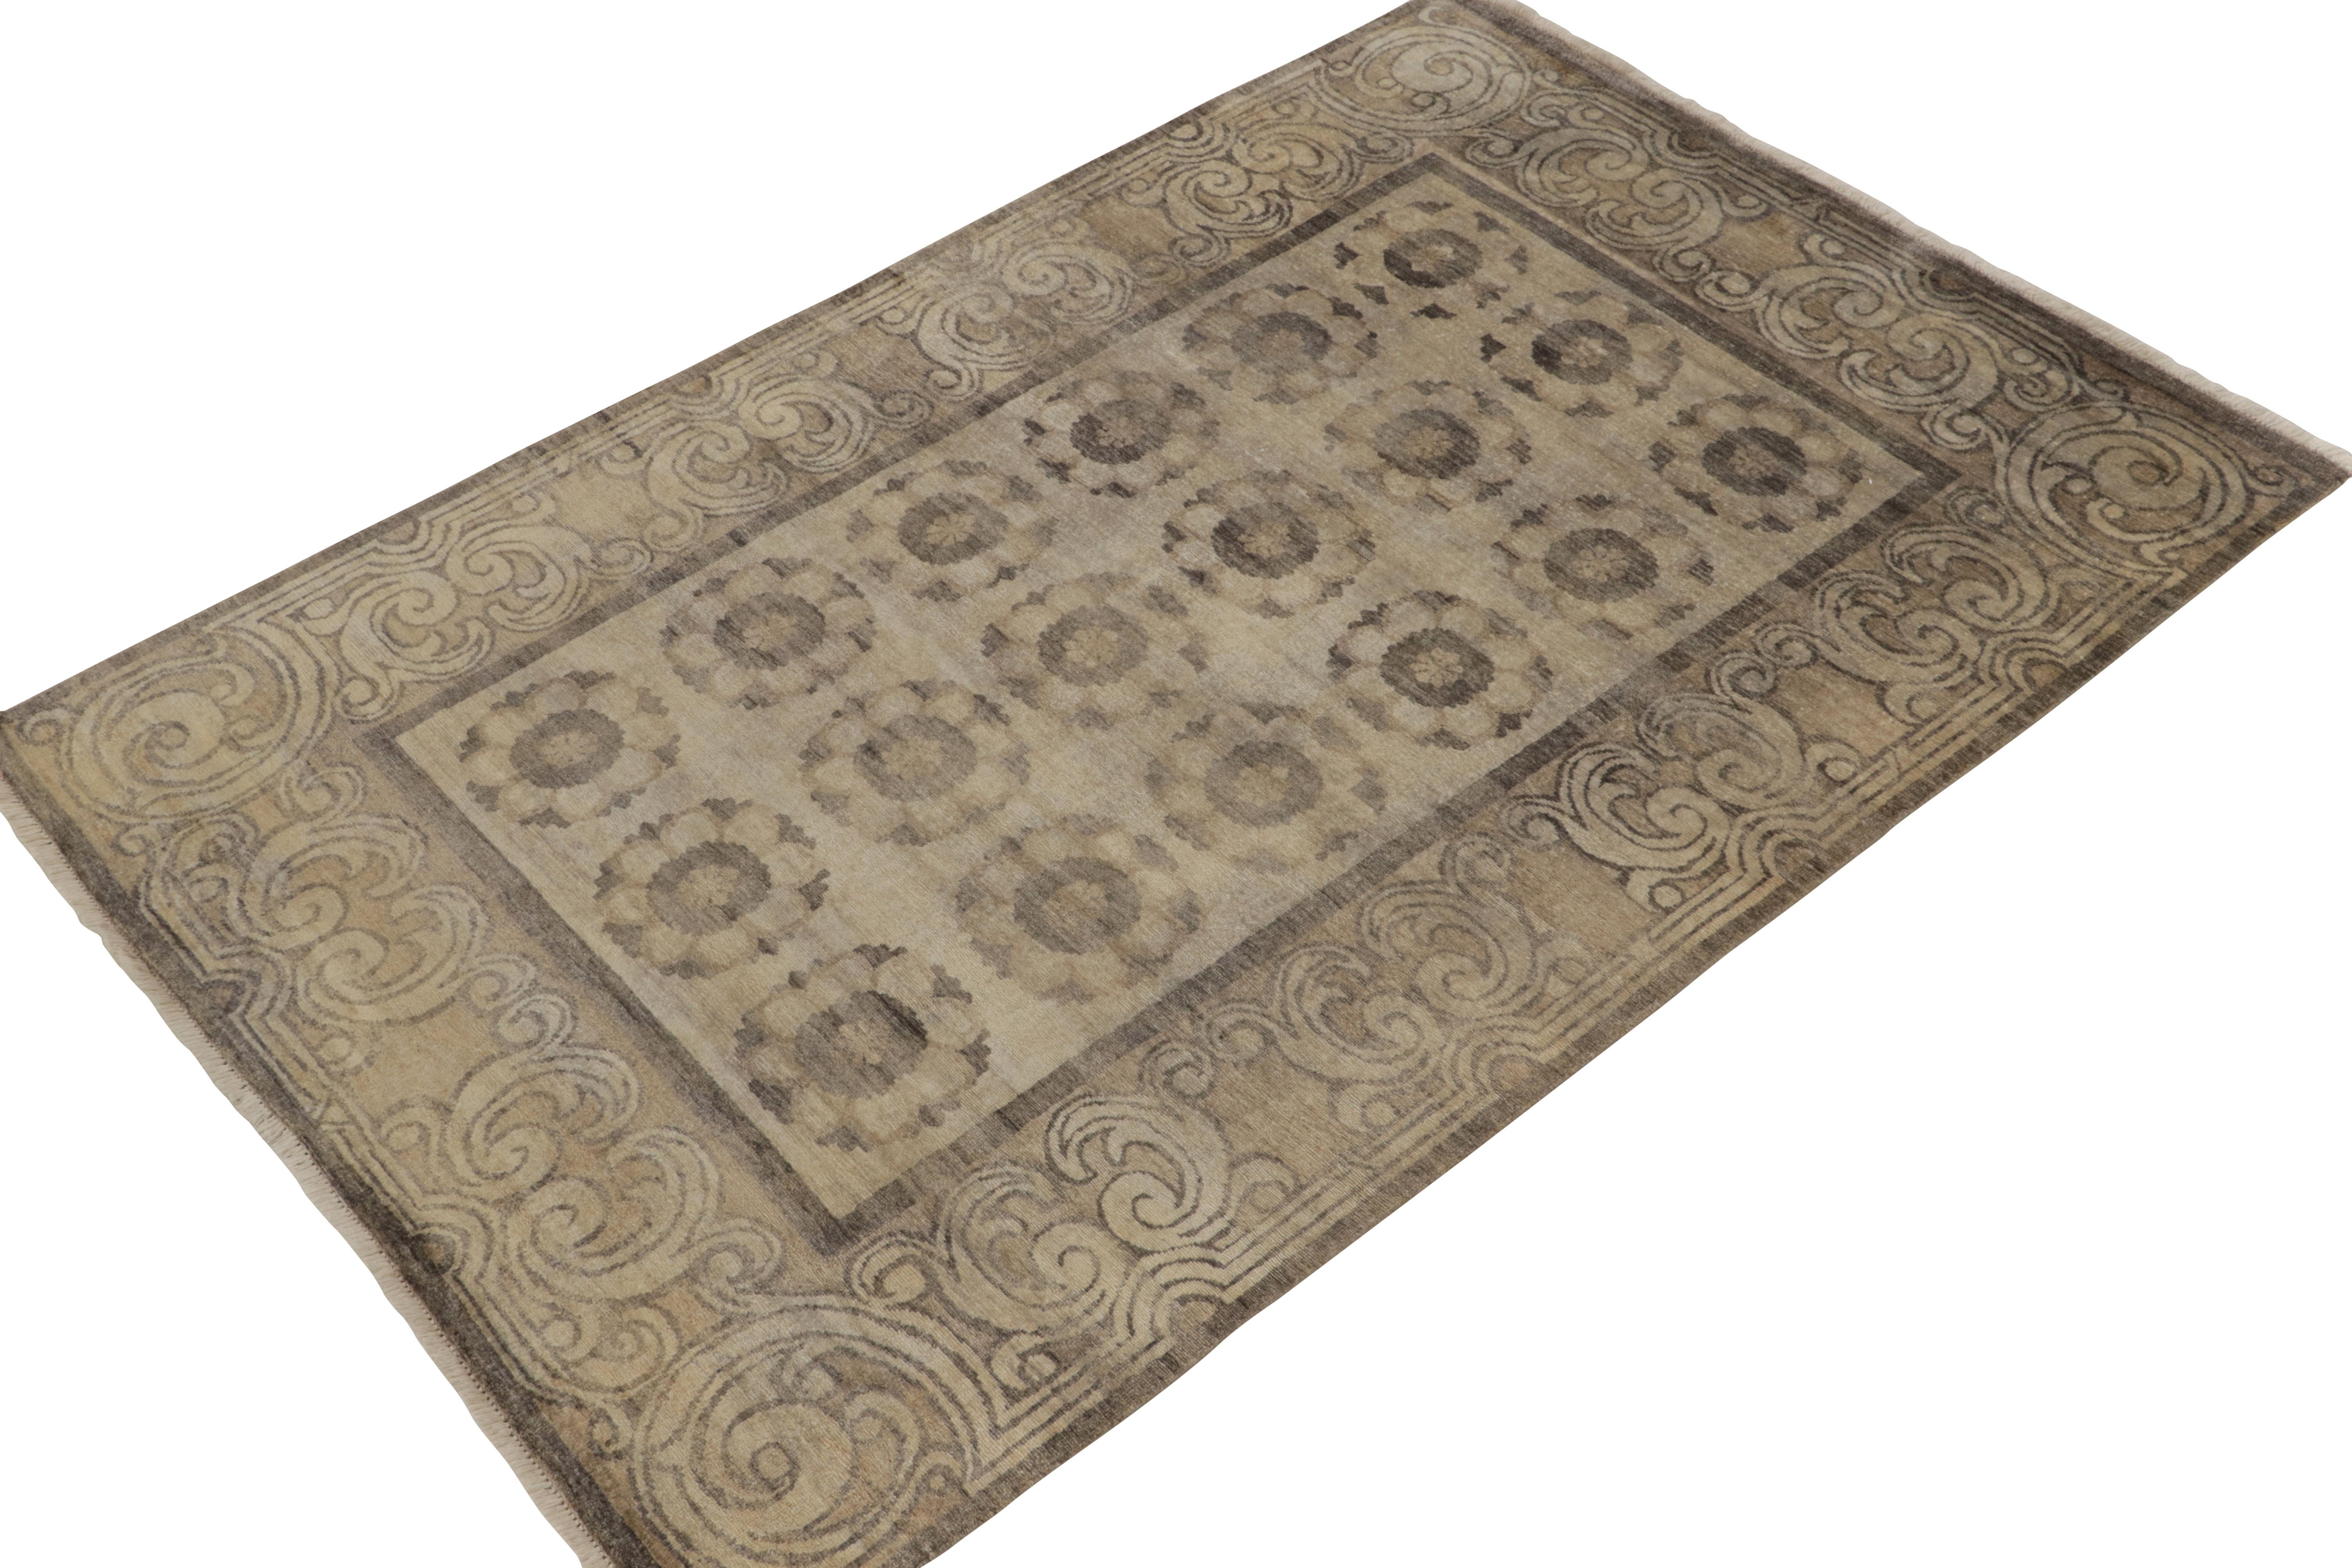 Handknotted in luxurious silk, this 6x9 rug from our Modern Classics collection is particularly inspired by antique Spanish Arts & Crafts rugs. 

On the Design: The scale revels in classic medallions and floral patterns relishing rich, comfortable